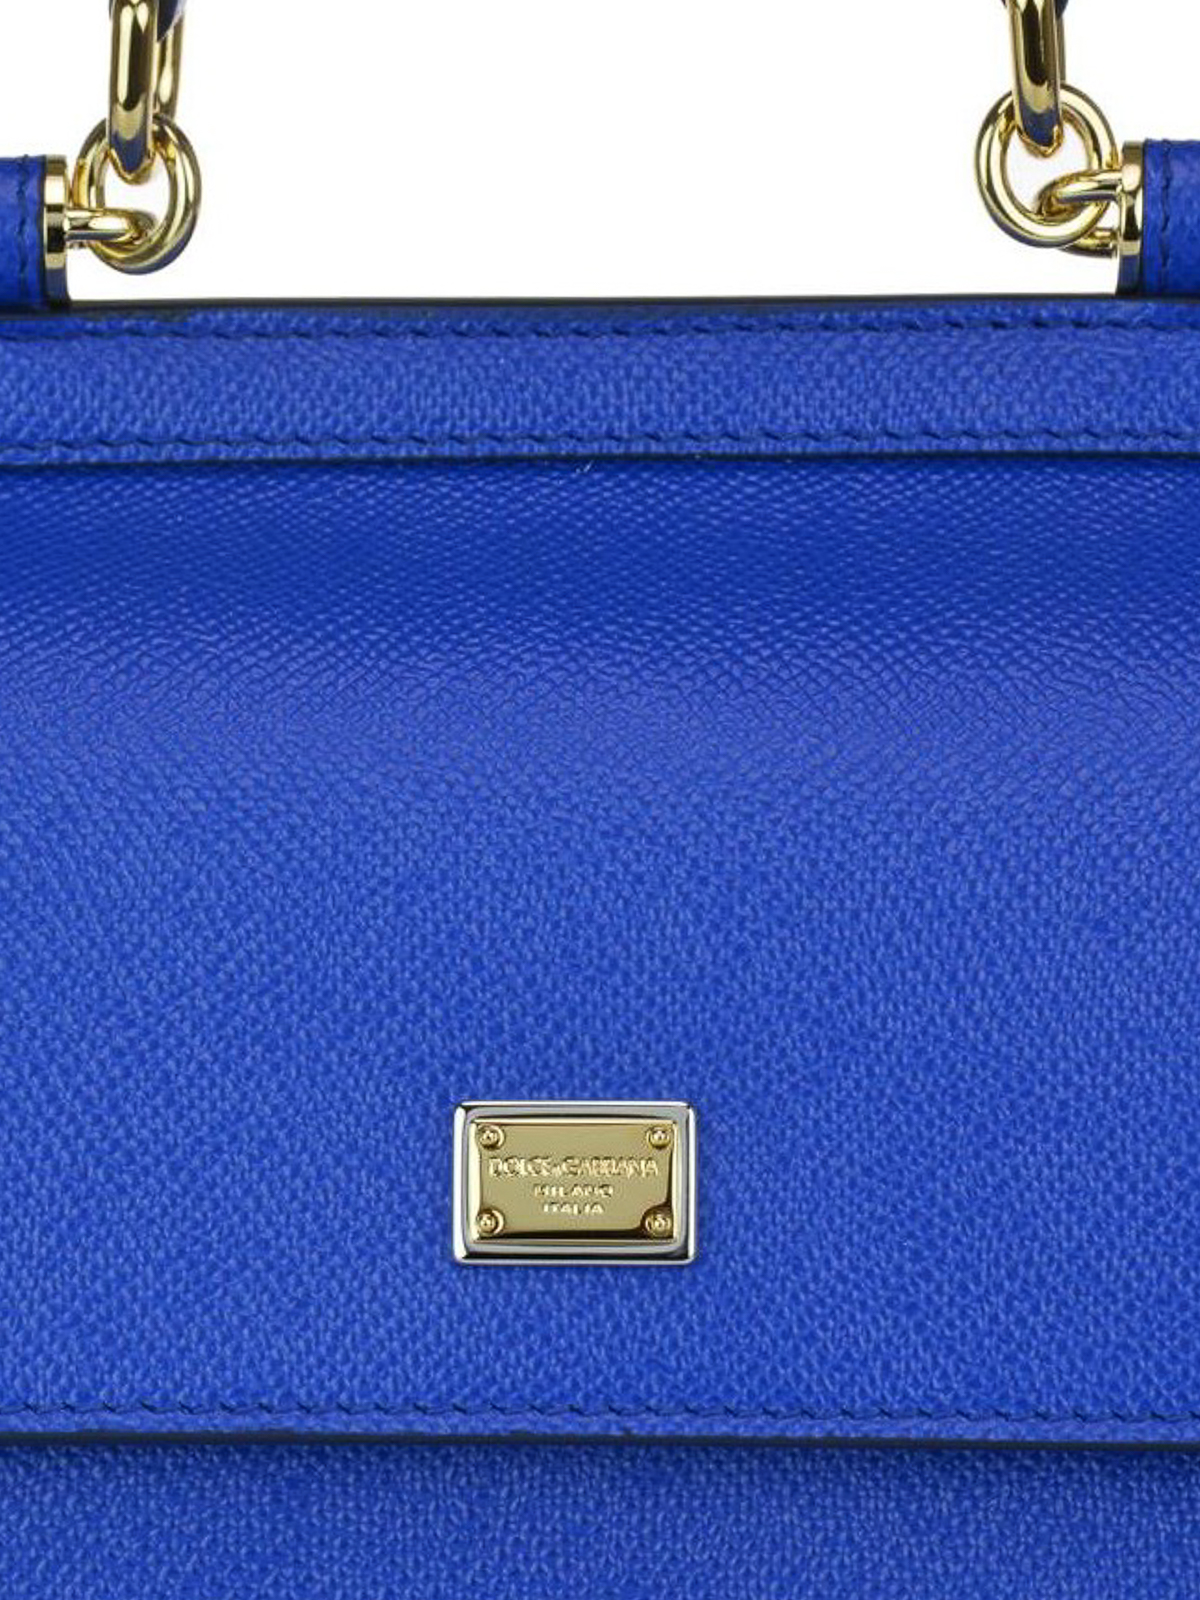 Cross body bags Dolce & Gabbana - Sicily S electric blue leather bag -  BB6003A10018H644